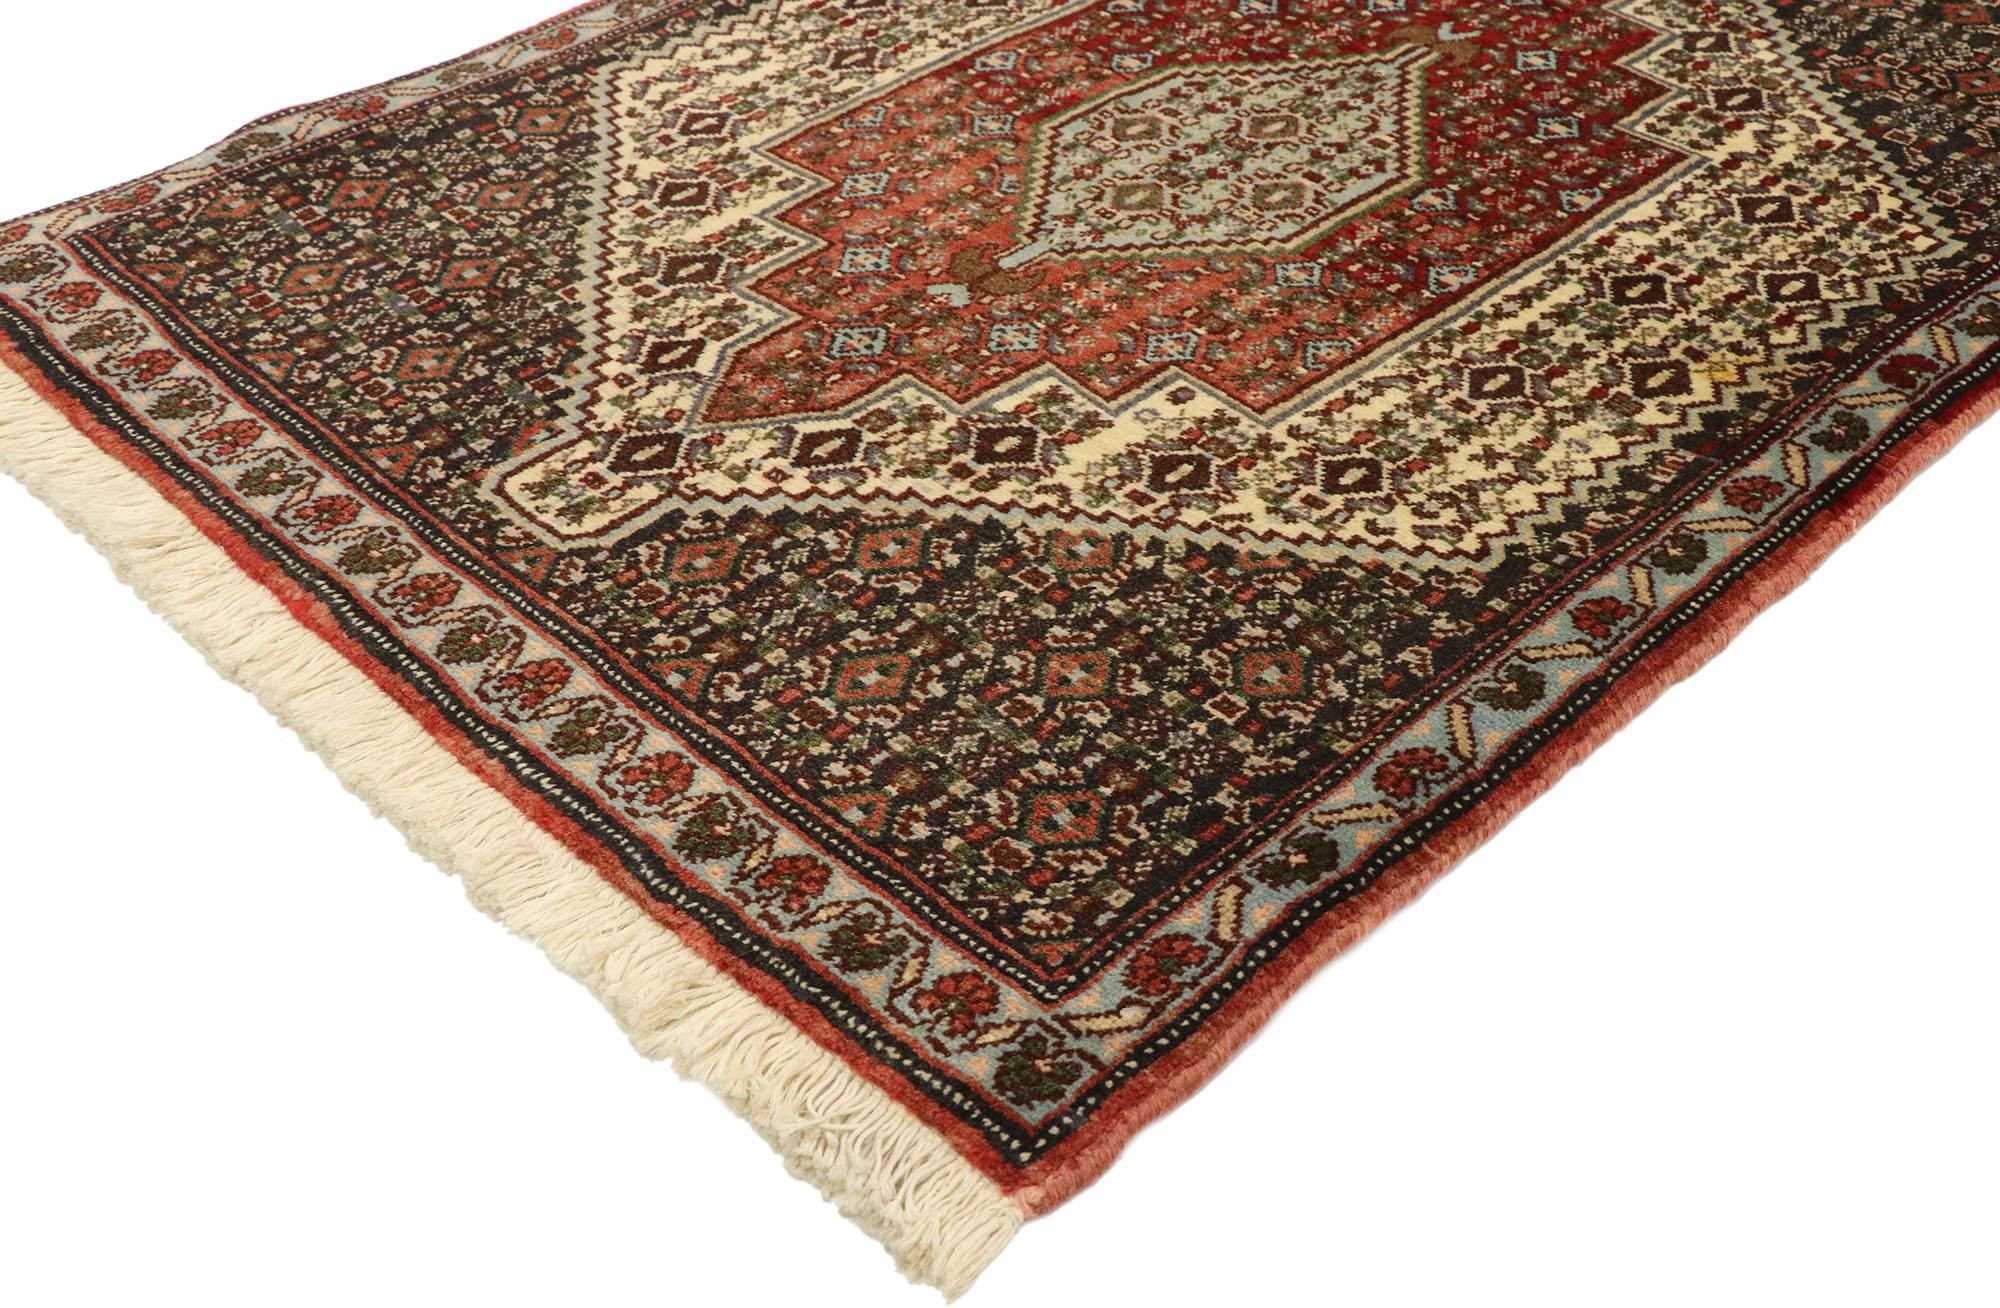 75011, vintage Persian Sanadaj Accent rug, Kitchen, Foyer or Entry rug. This hand knotted wool vintage Persian Sanadaj accent rug features a centre medallion with anchor tip finials surrounded by an all-over geometric pattern. It is enclosed with a